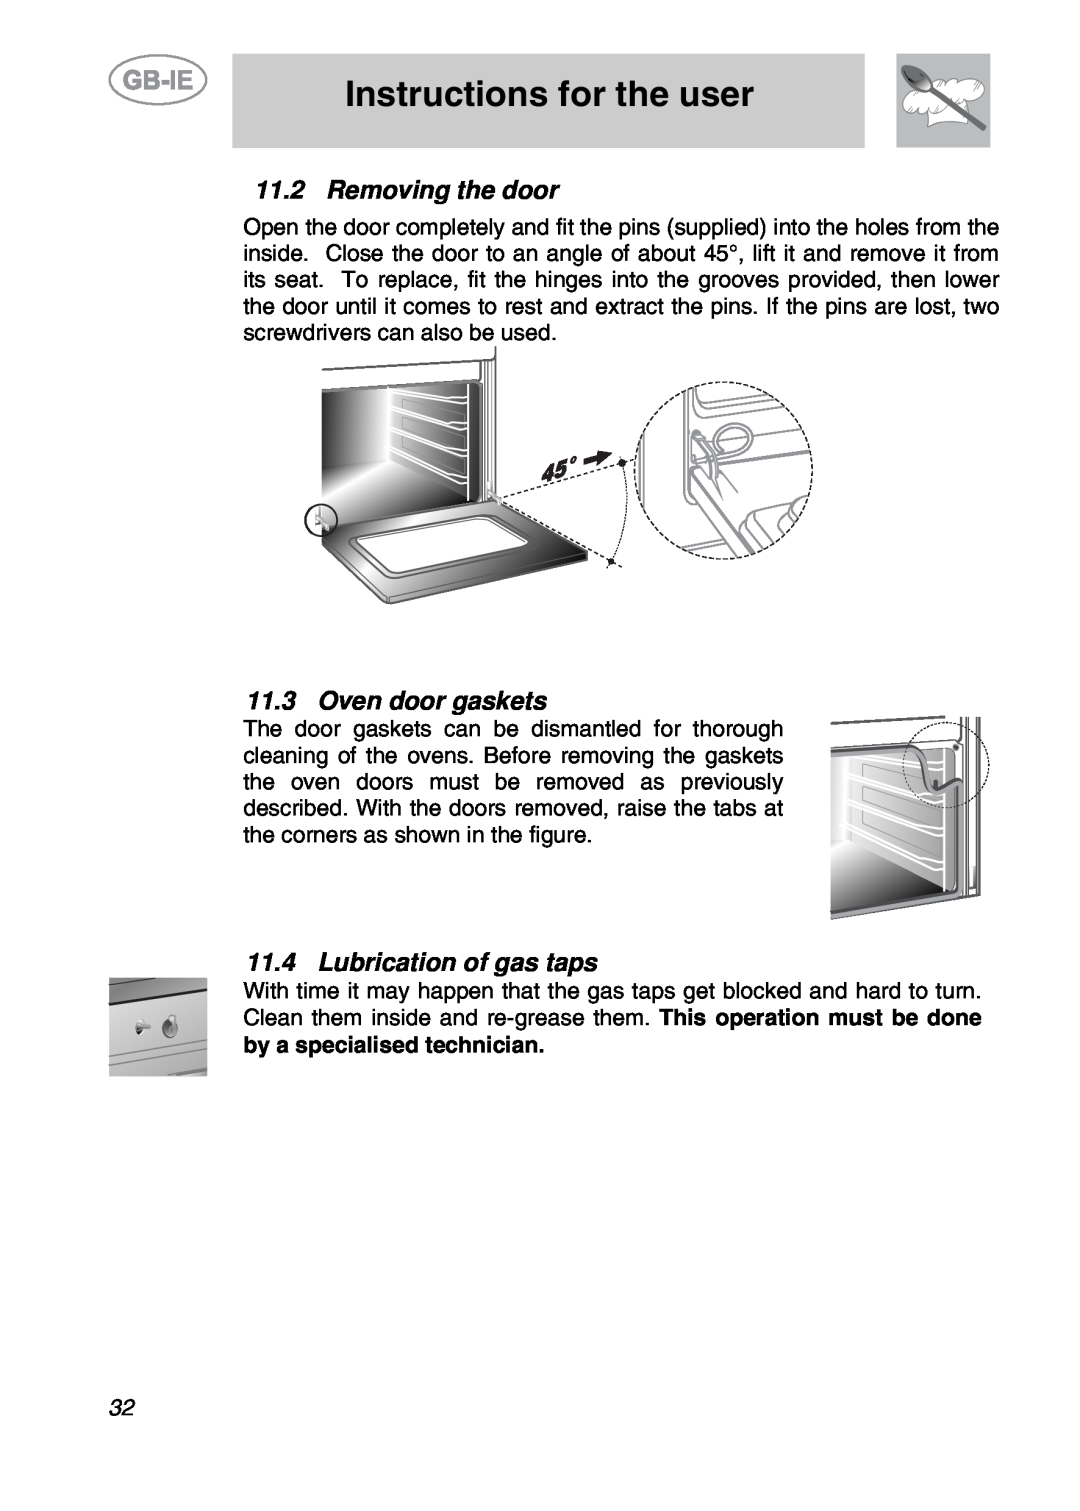 Smeg A2EA manual Removing the door, Oven door gaskets, Lubrication of gas taps, Instructions for the user 